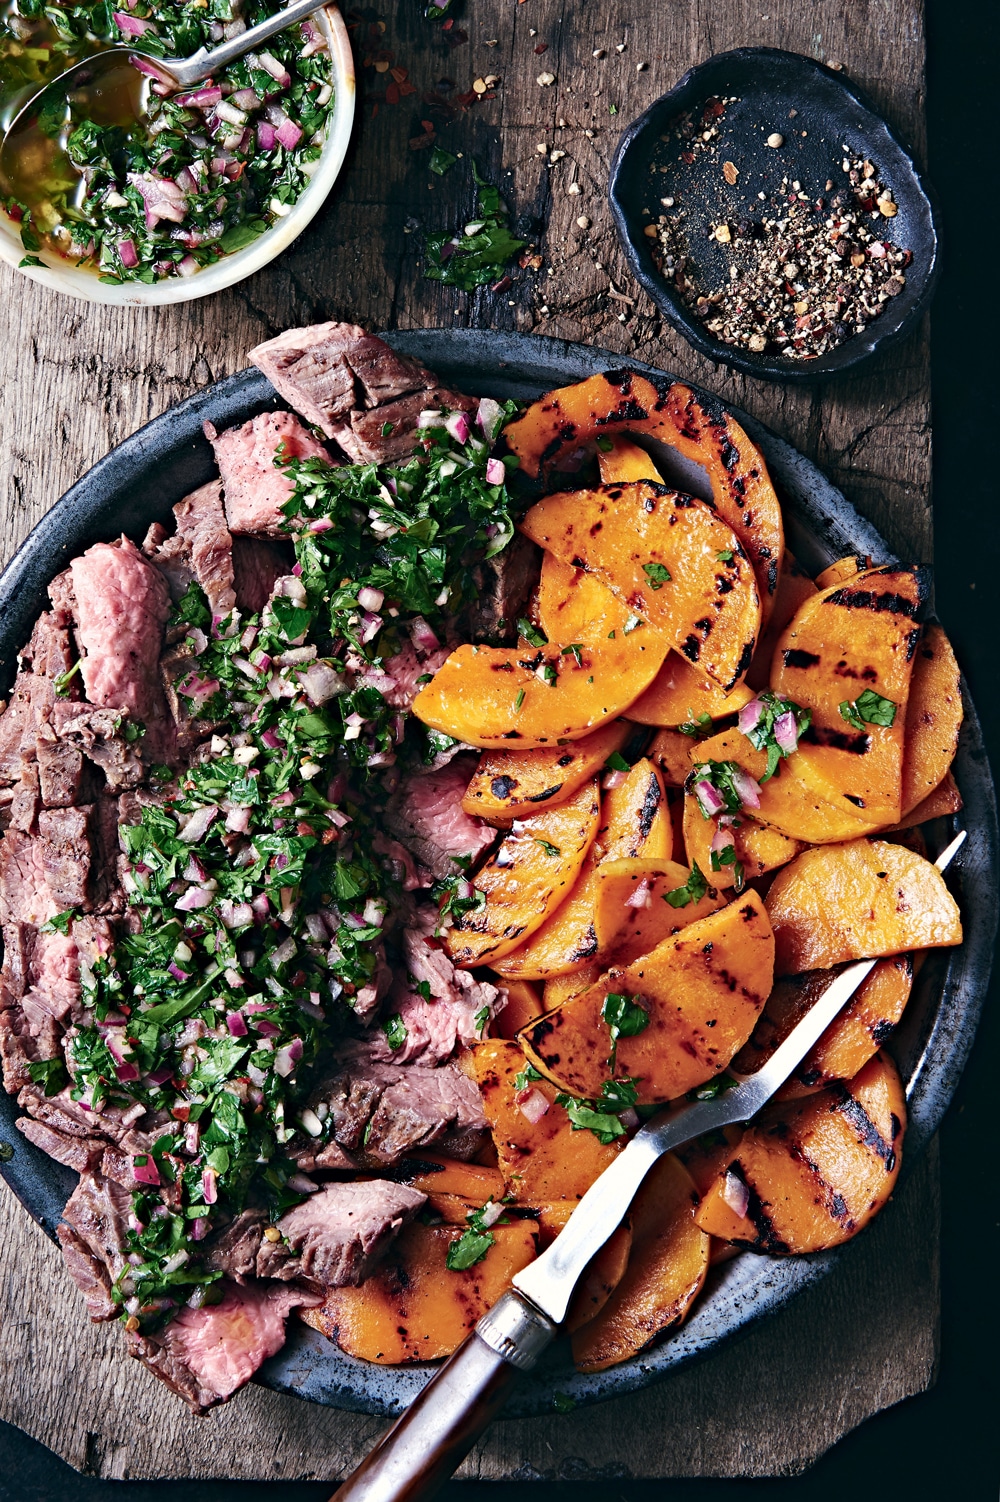 Grilled Flank Steak &#038; Butternut Squash with Chimichurri-Style Sauce